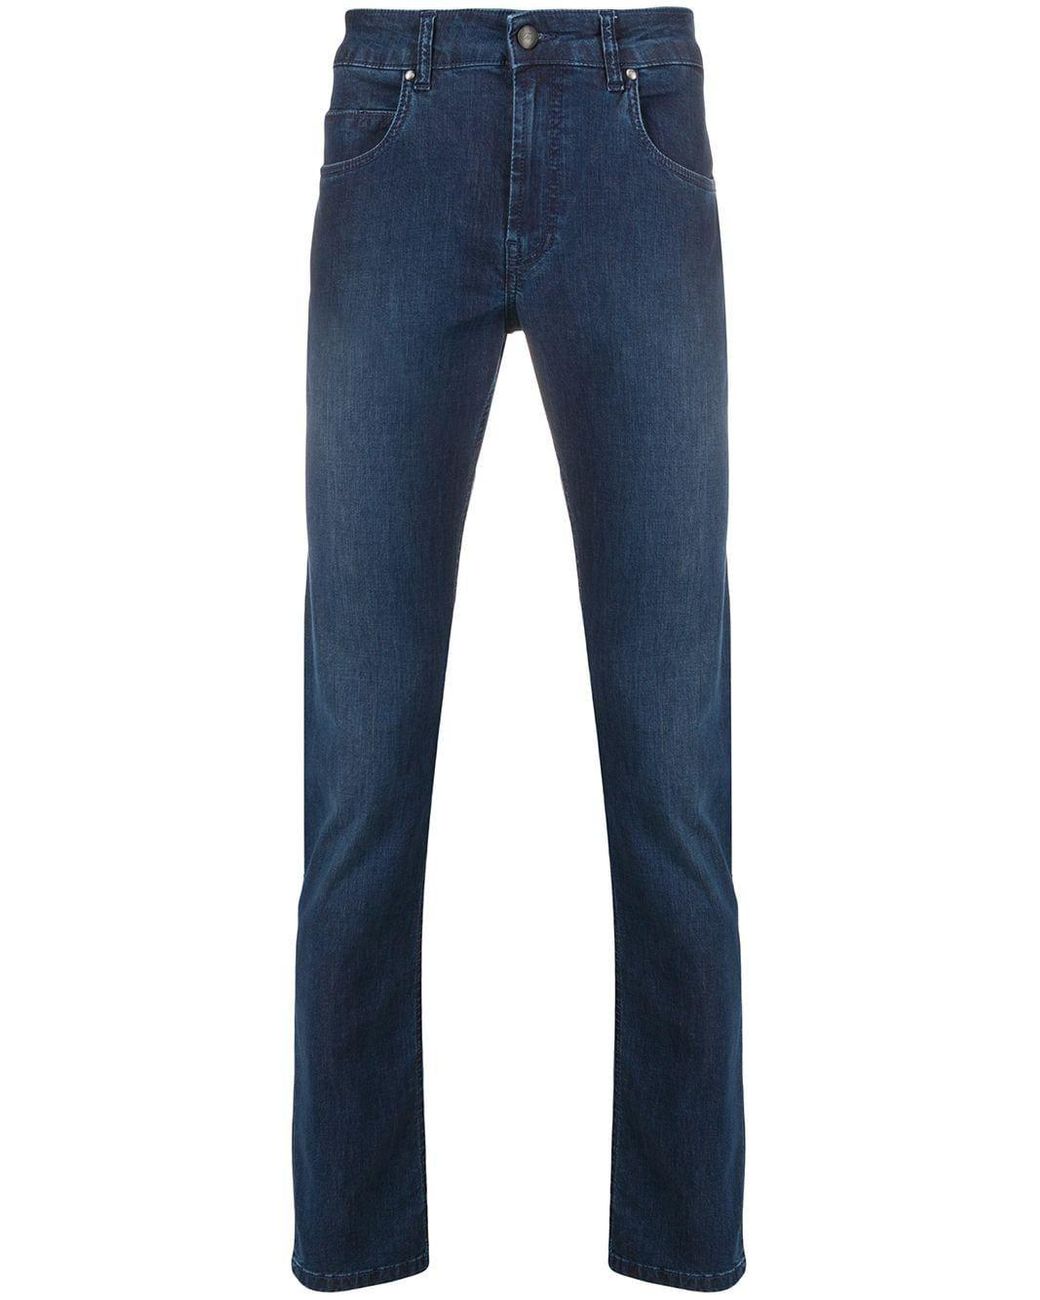 Fay Cotton Jeans in Blue for Men - Lyst